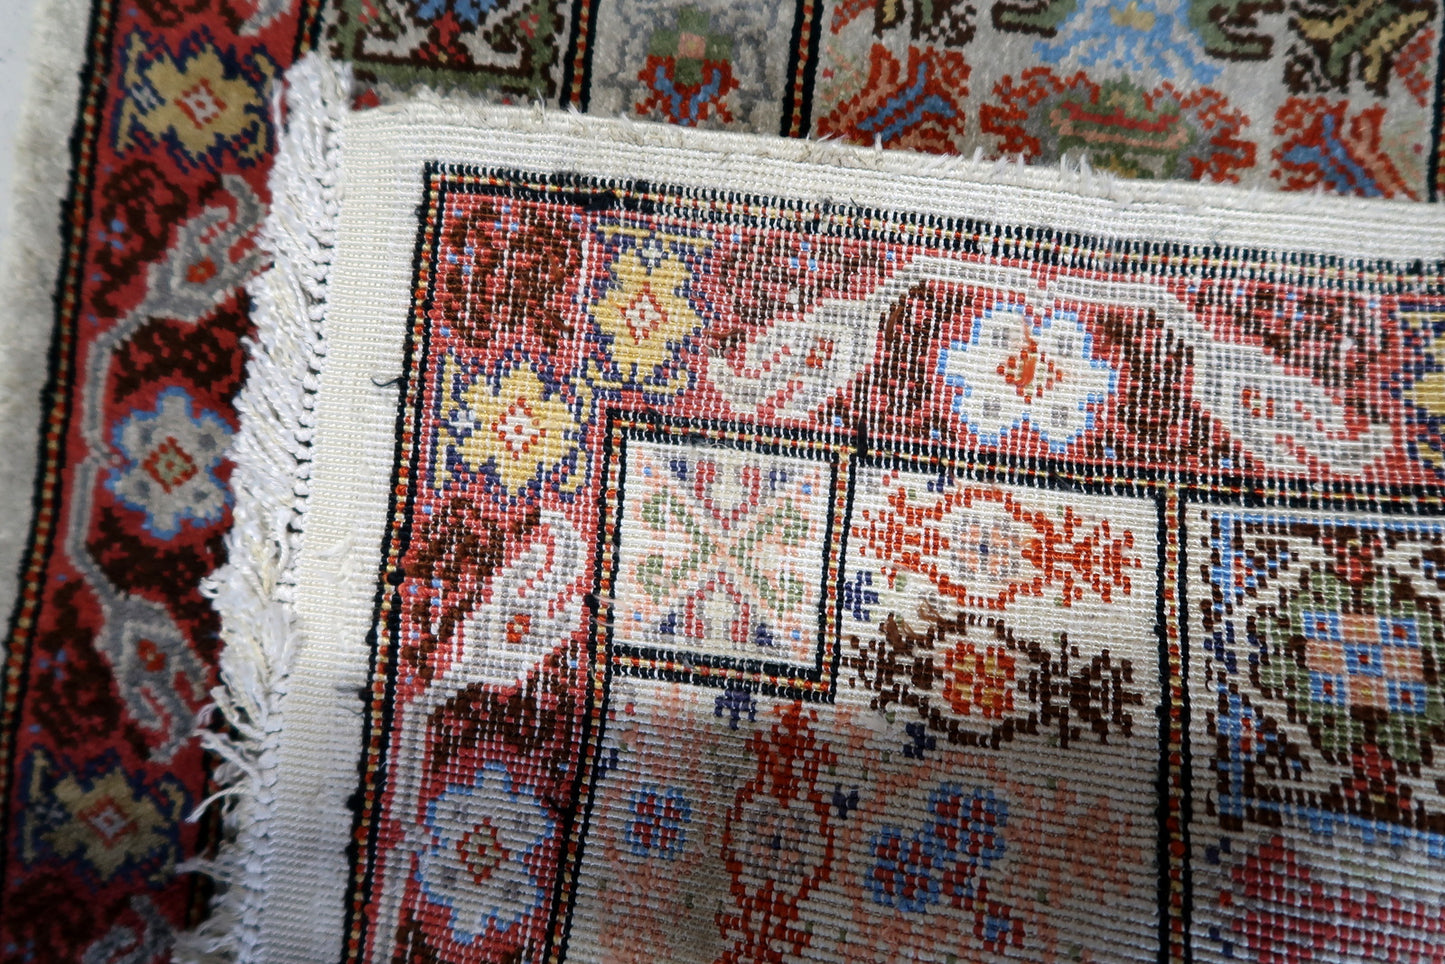 Back view of the vintage Tunisian silk rug highlighting its craftsmanship and size